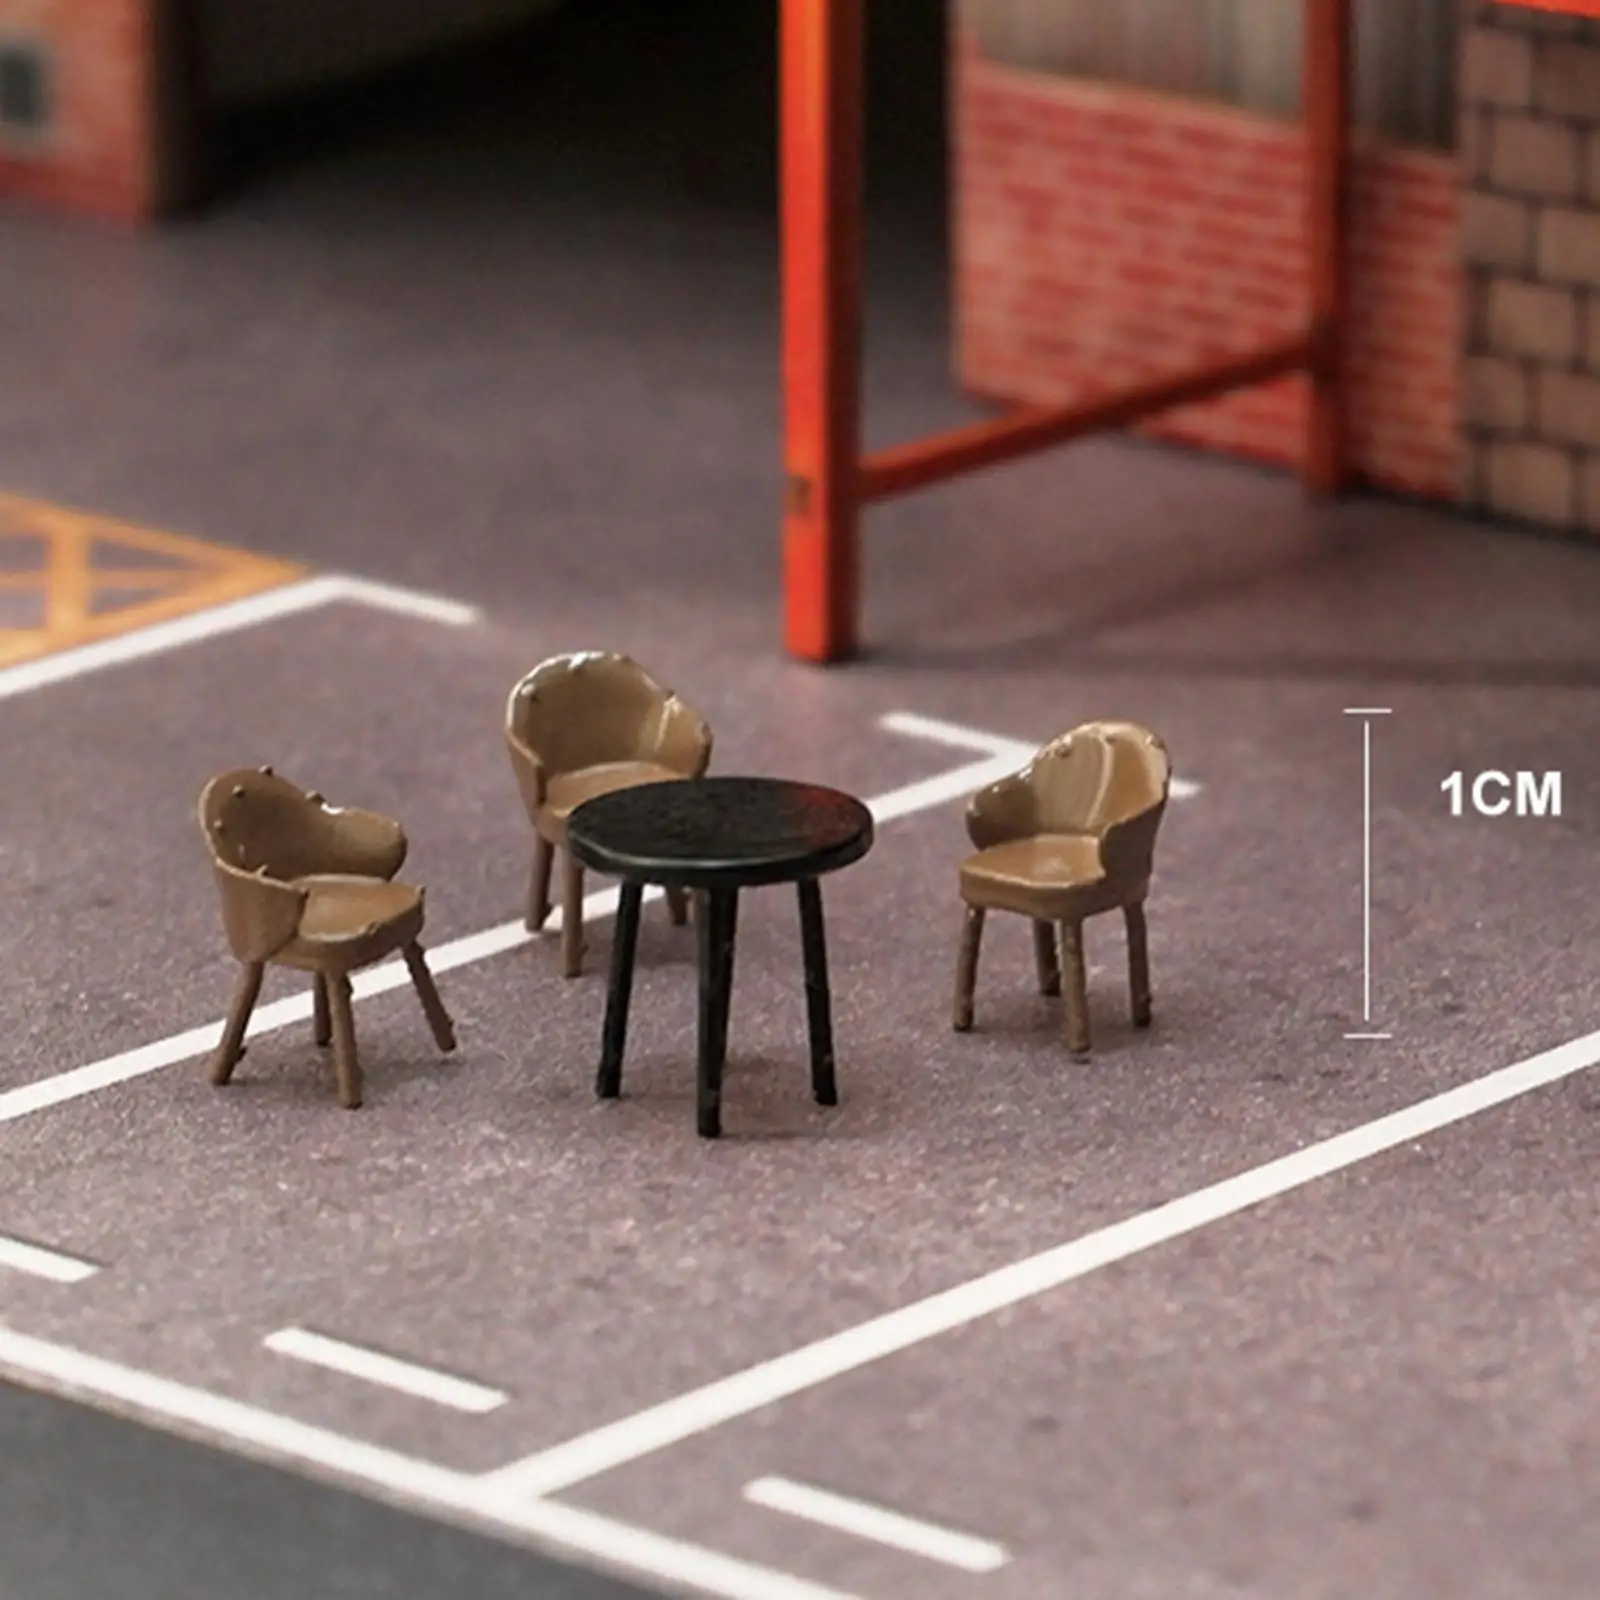 1/64 Miniature Figure Chair and Desk Set Mini Scene Layout for Model Train Architecture Model DIY Projects Collections Railway